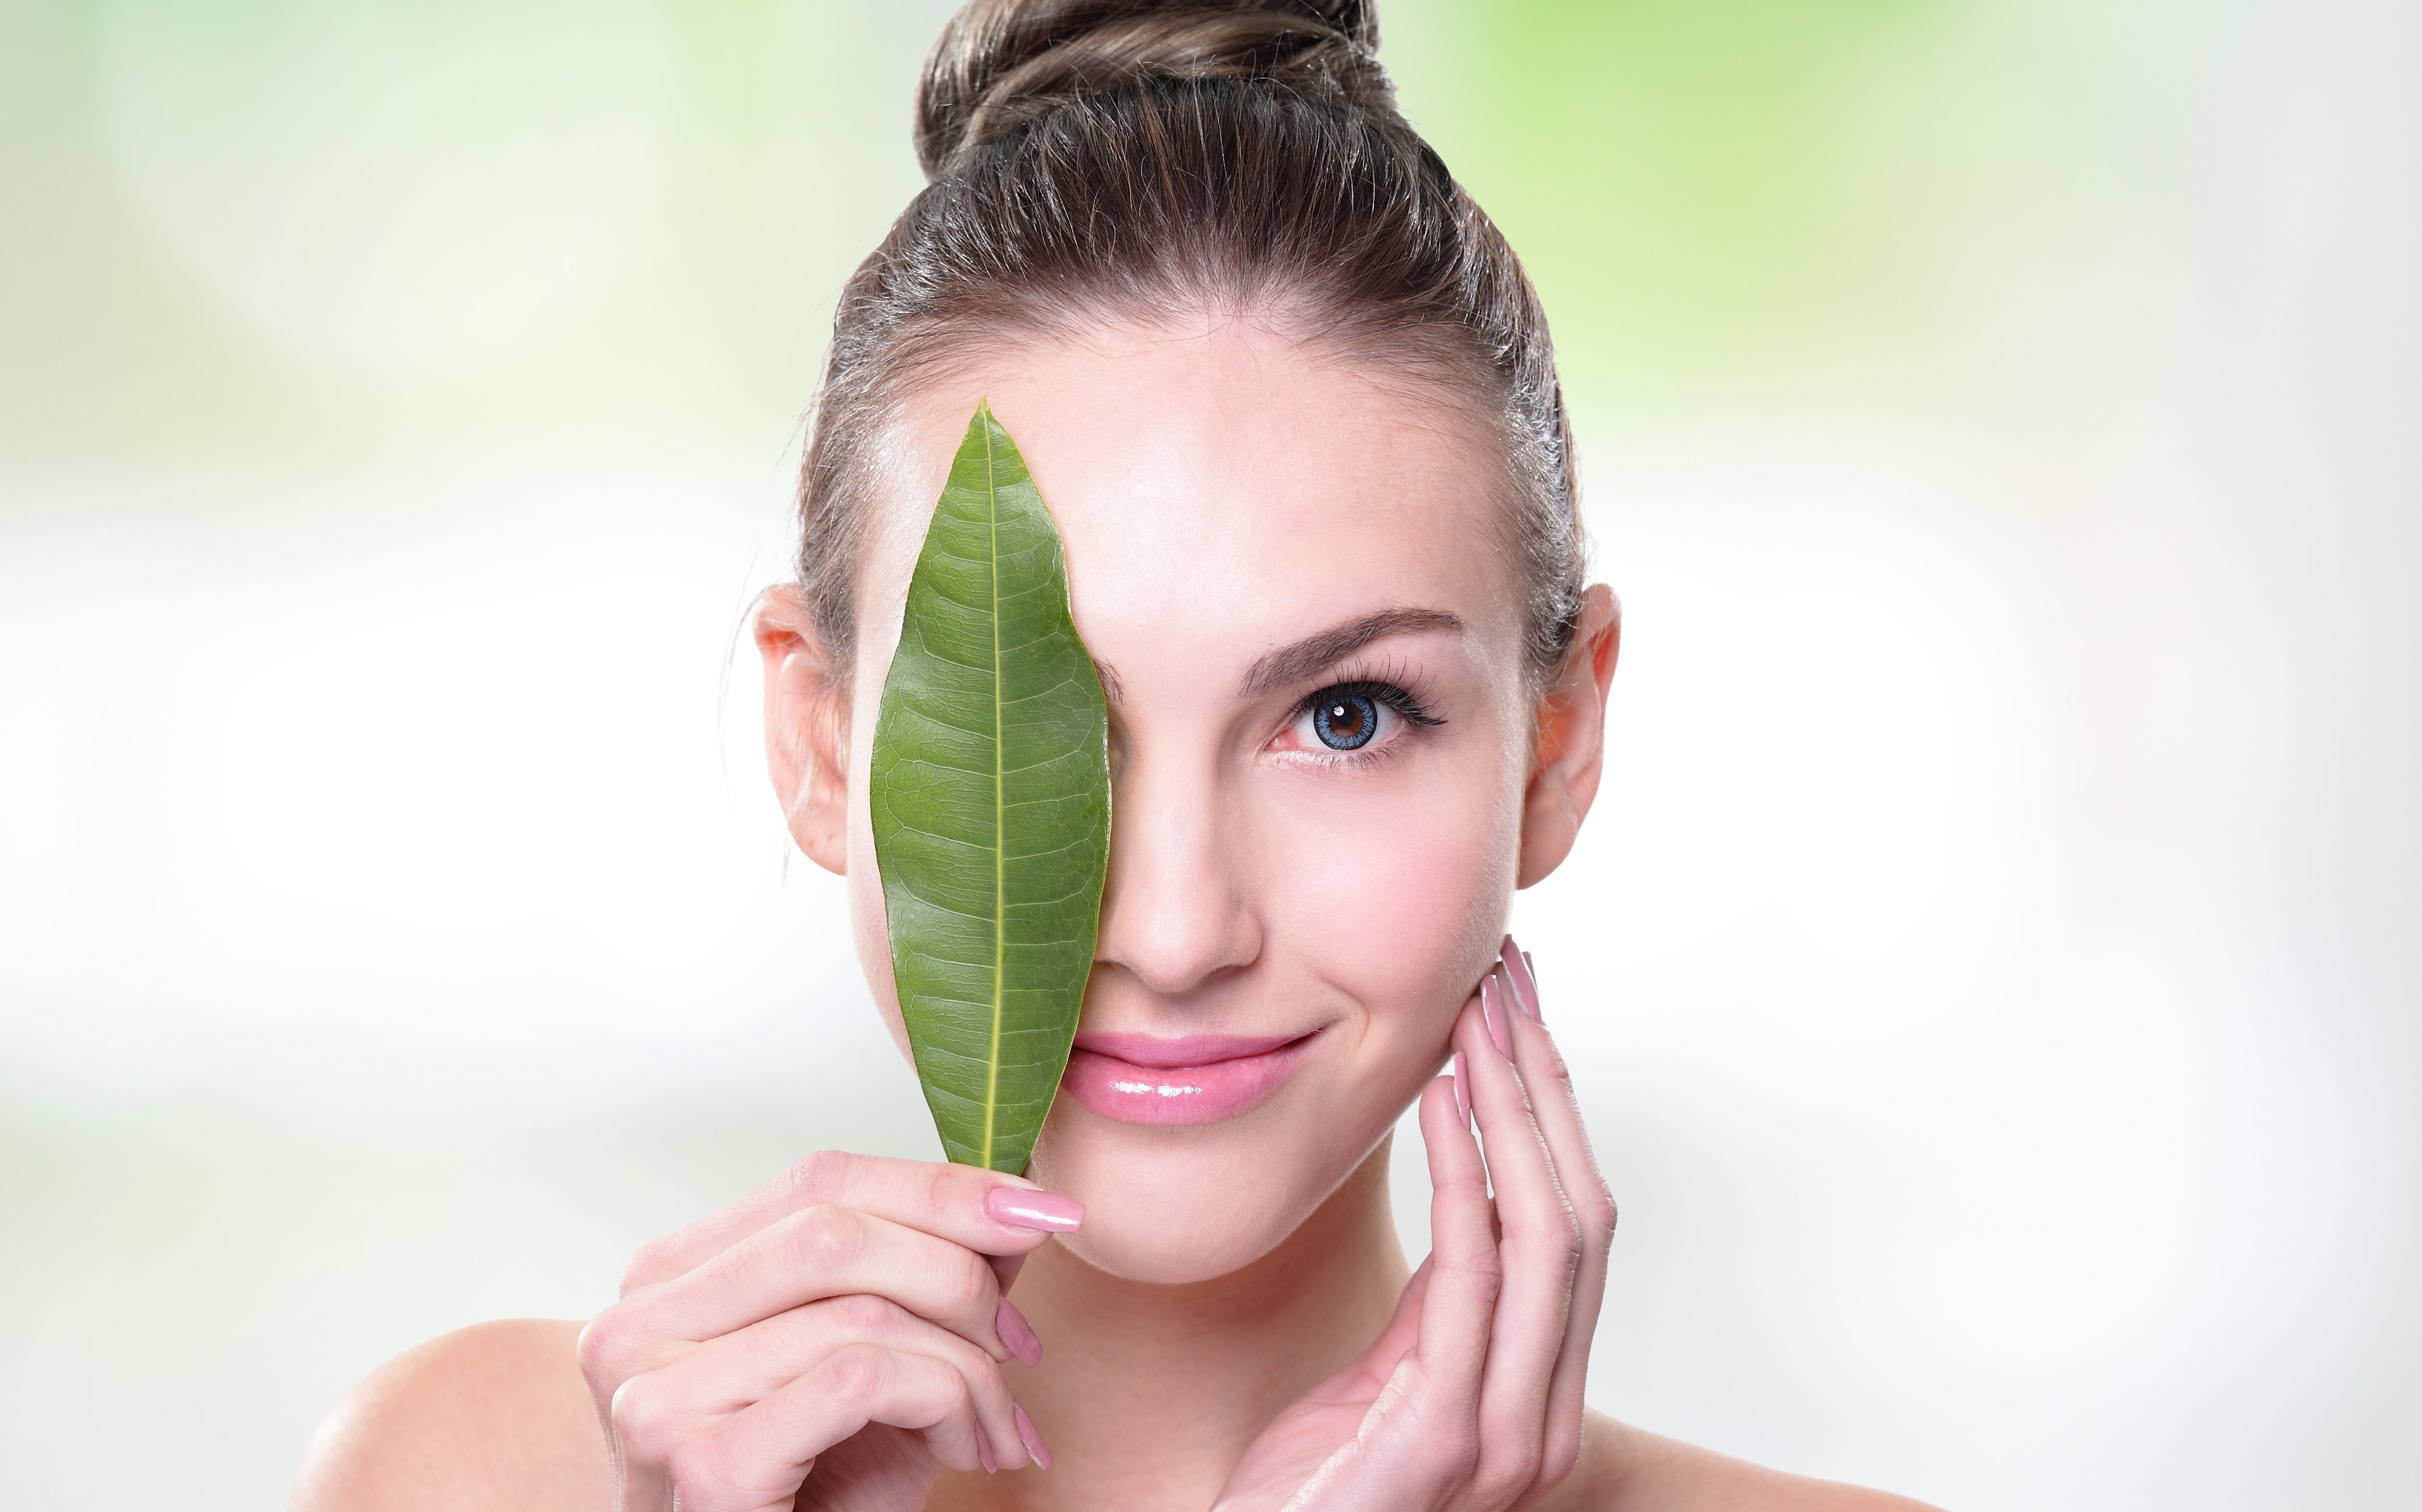 More beauty buyers are going green